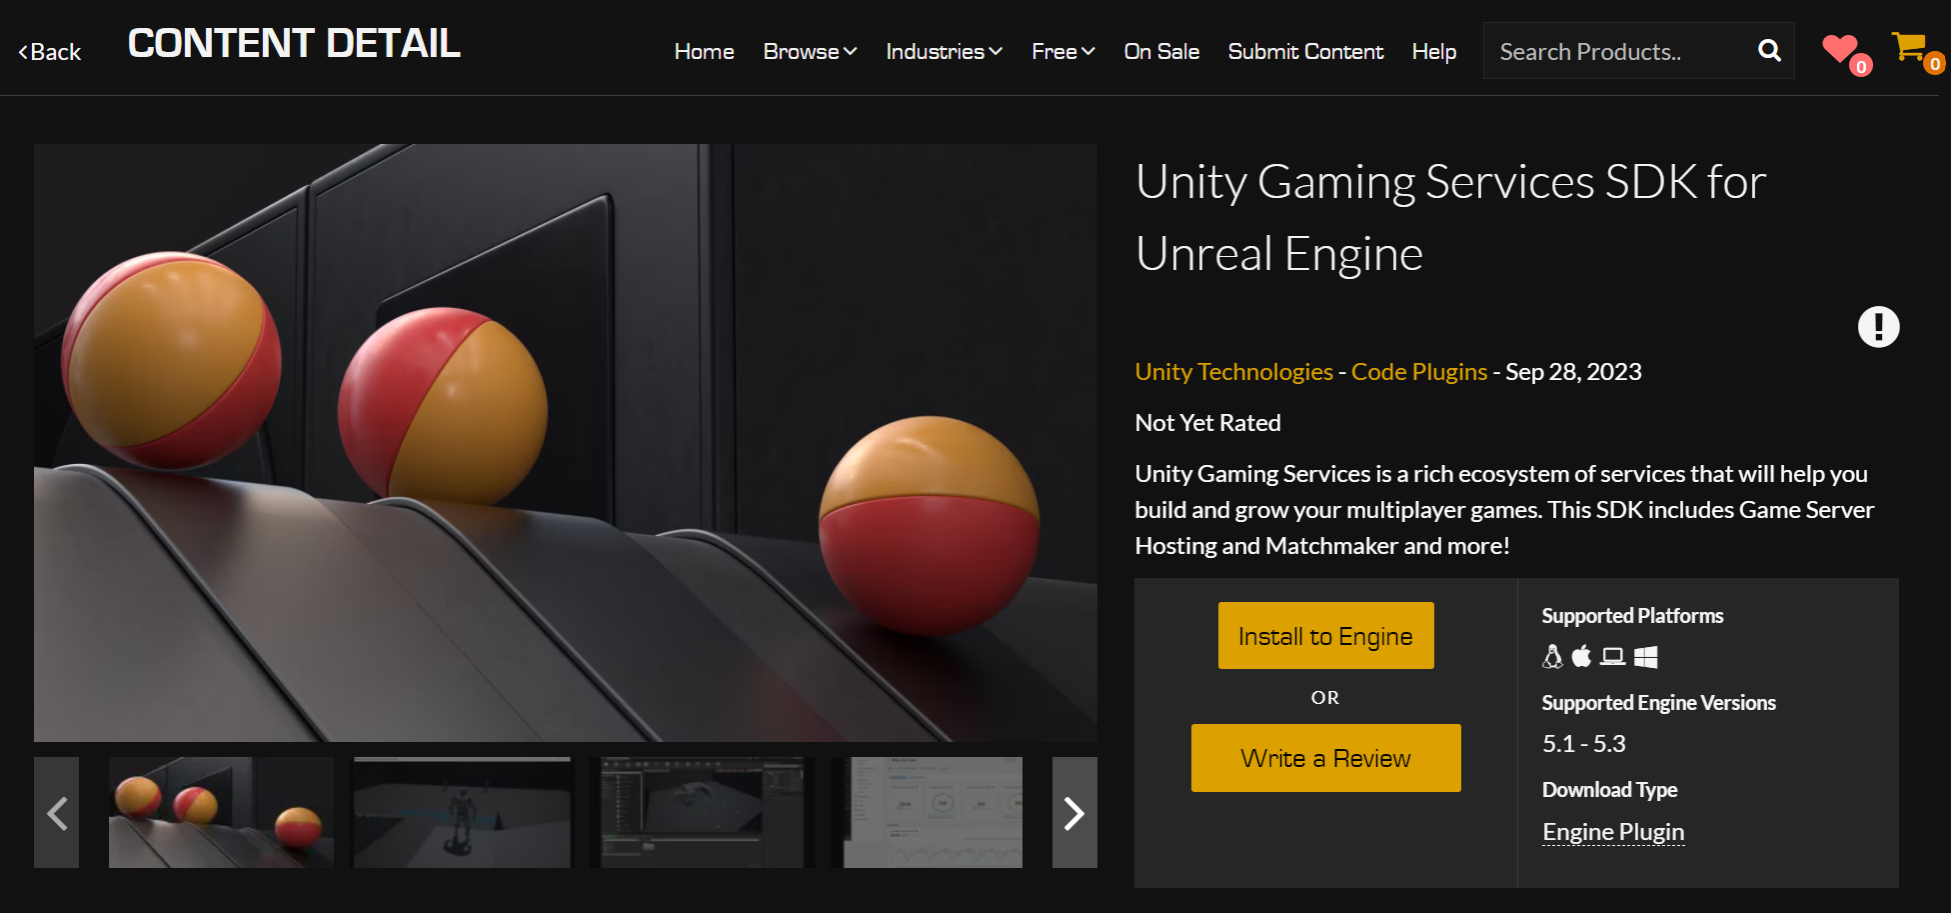 Unity Gaming Services SDK for Unreal Engine install button